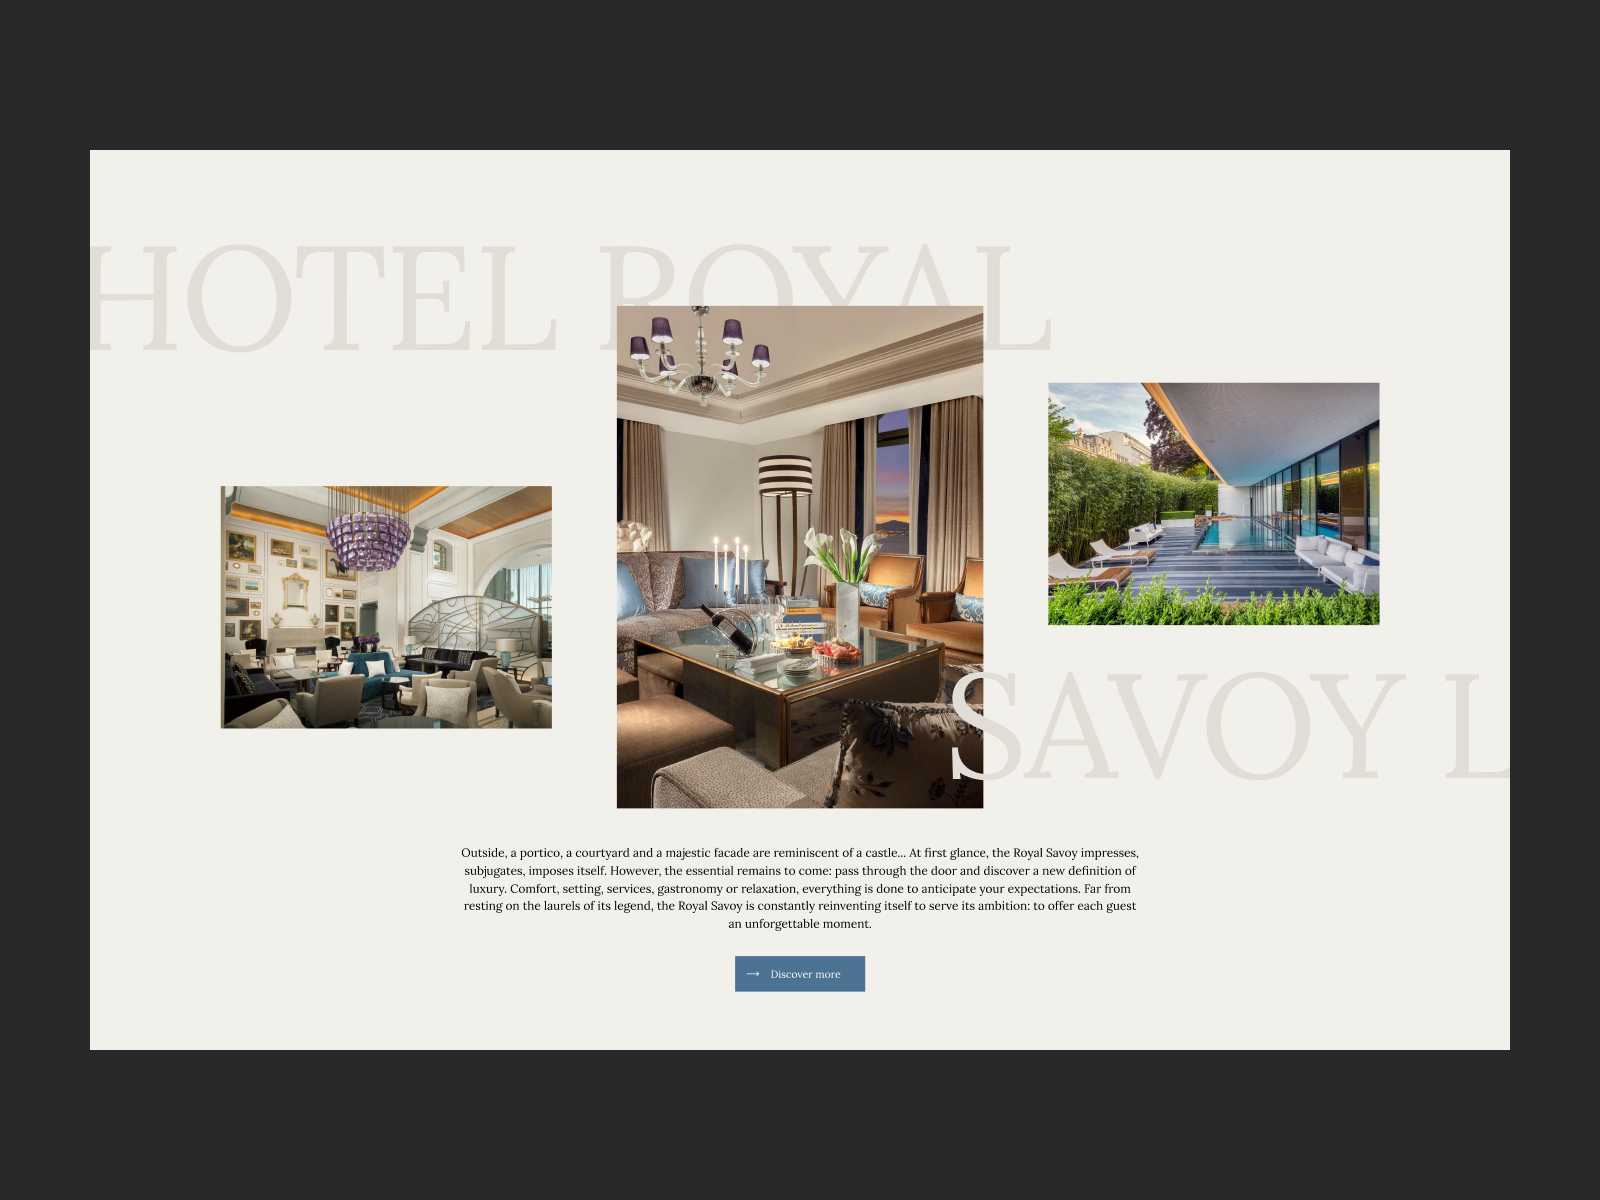 ROYAL SAVOY ABOUT US